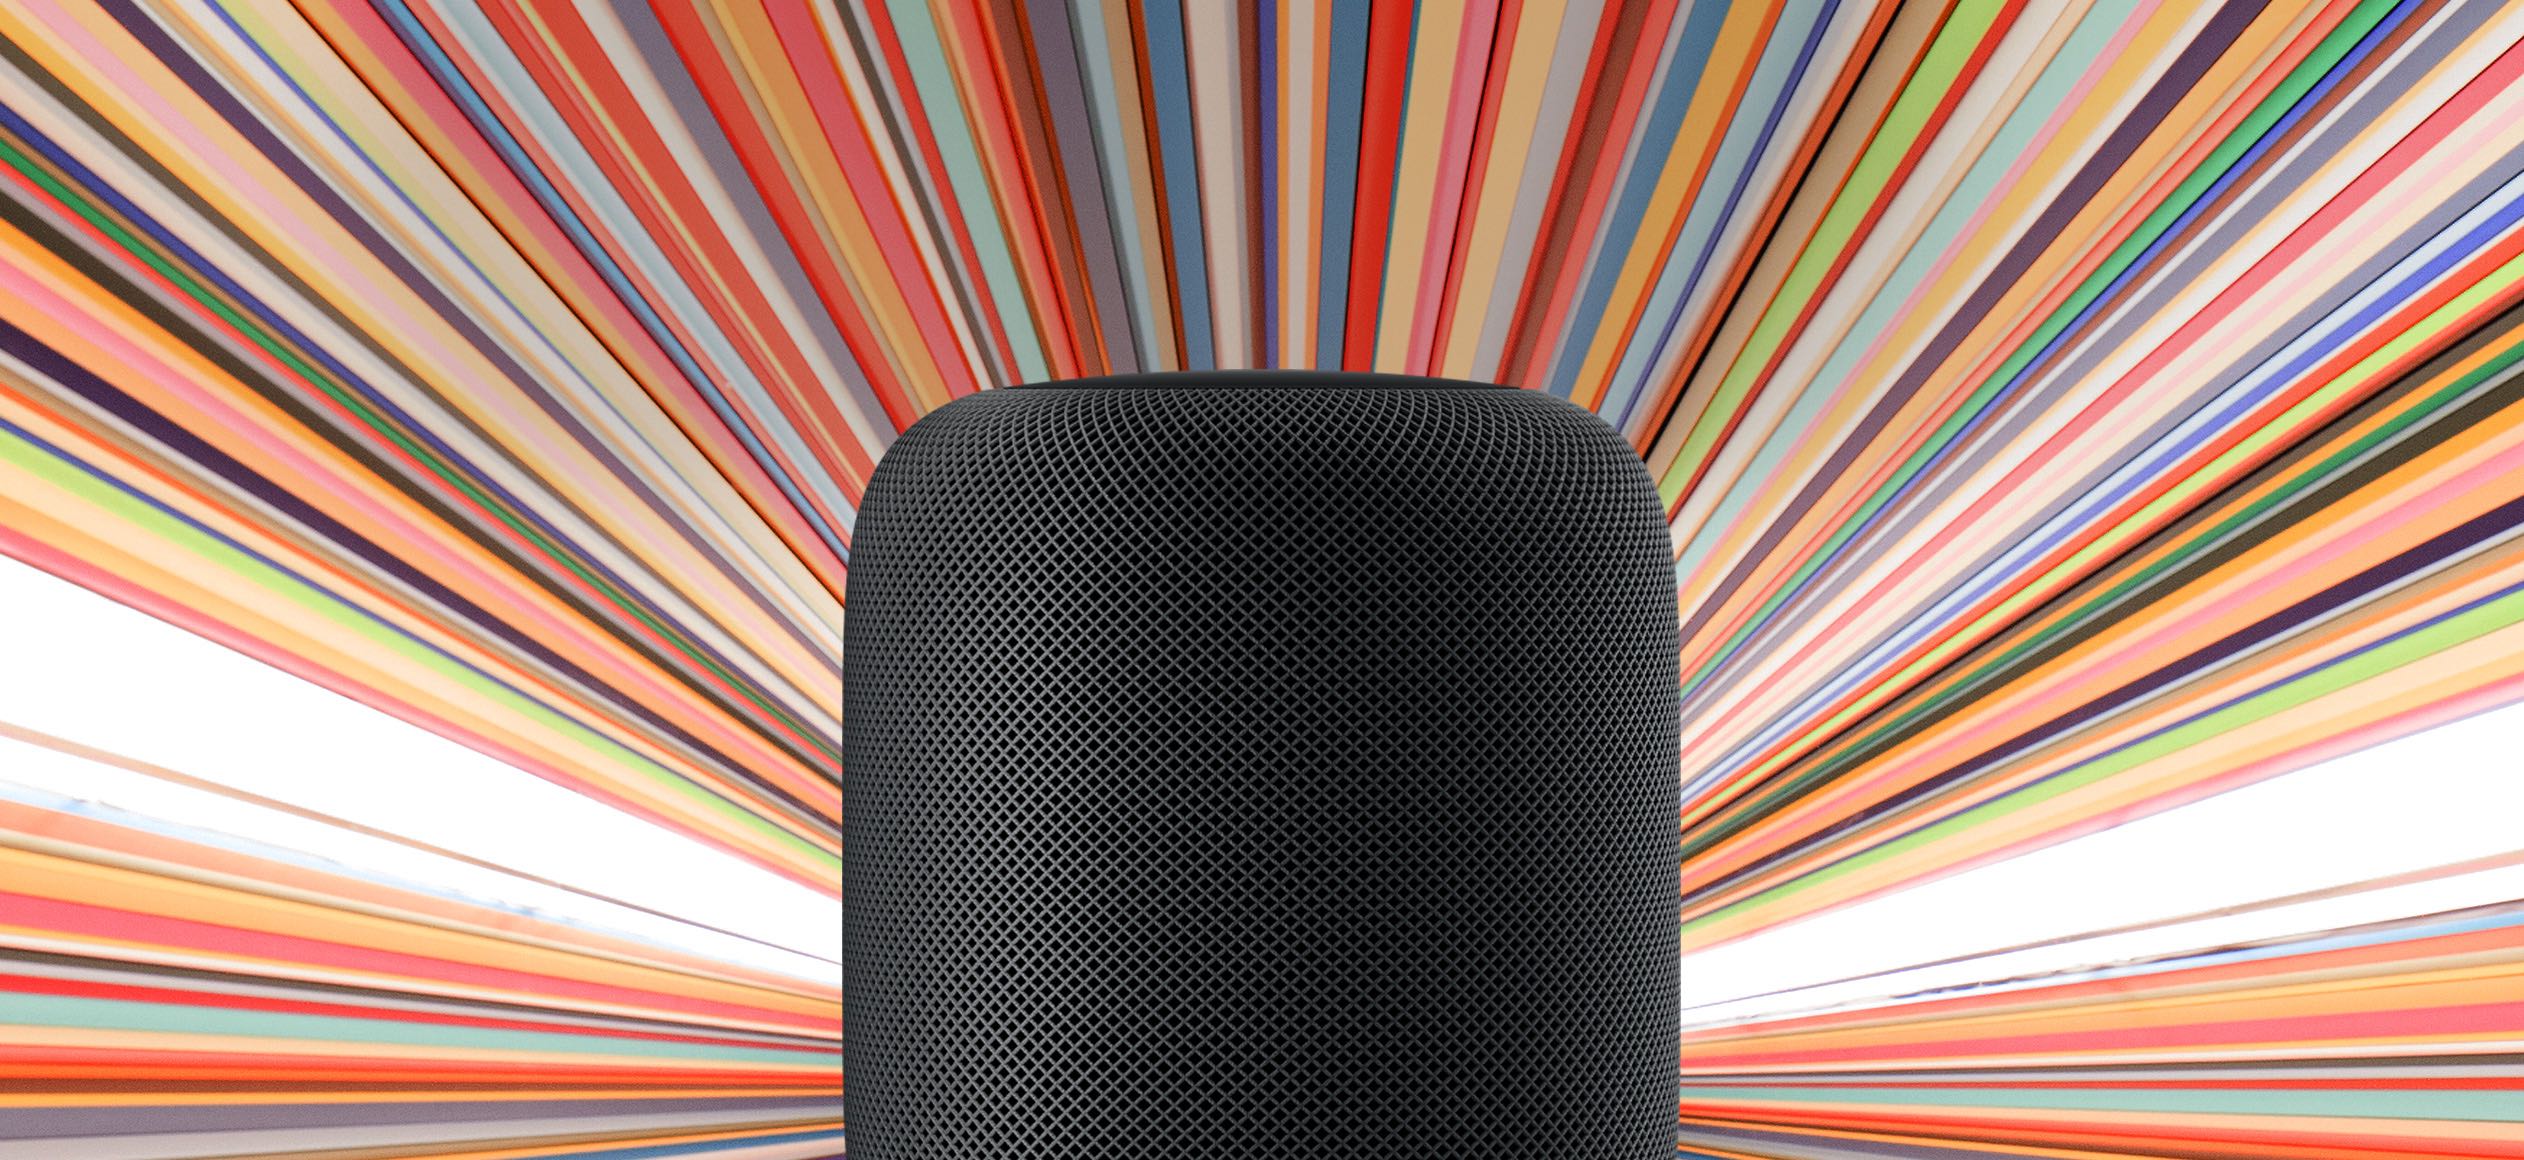 HomePod Will Soon be Able to Make Phone Calls, Run Multiple Timers at Once, and More